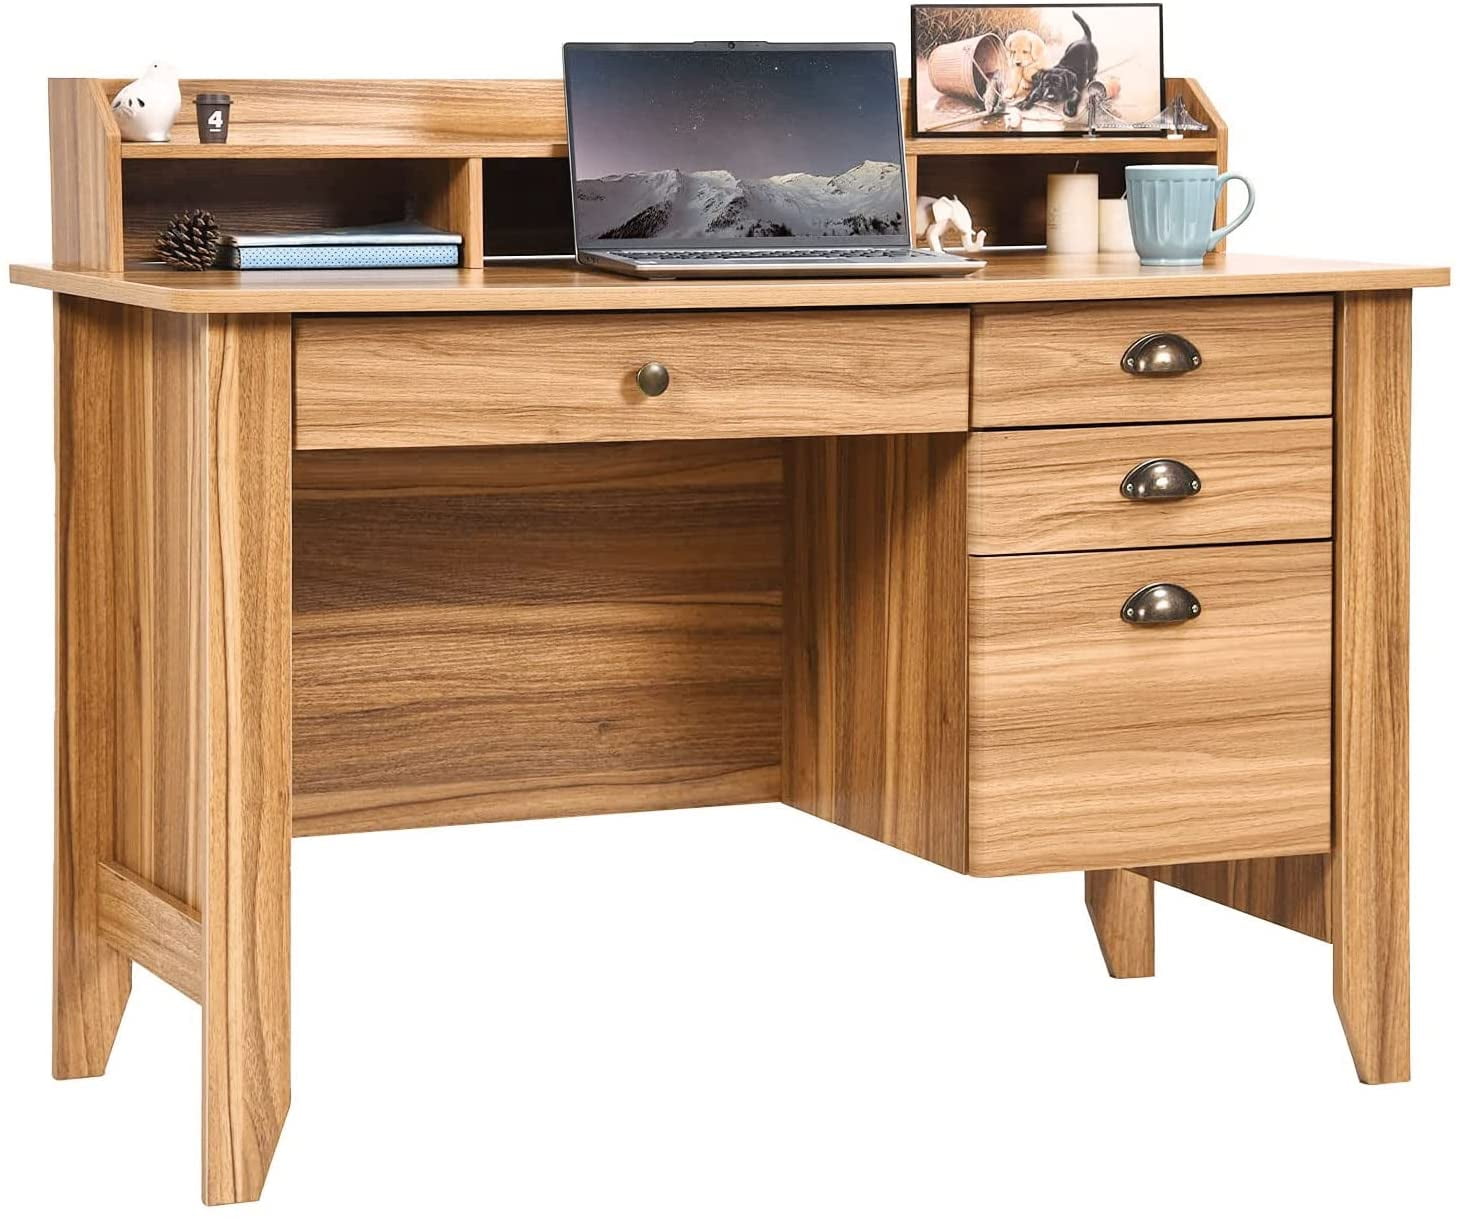 Catrimown 47.5 in Computer Desk with 4 Drawers, Wood Executive Desk Home Office Desk with Hutch, Vintage Study Table Writing Desk with Shelf for Small Spaces, Rustic Brown - 3